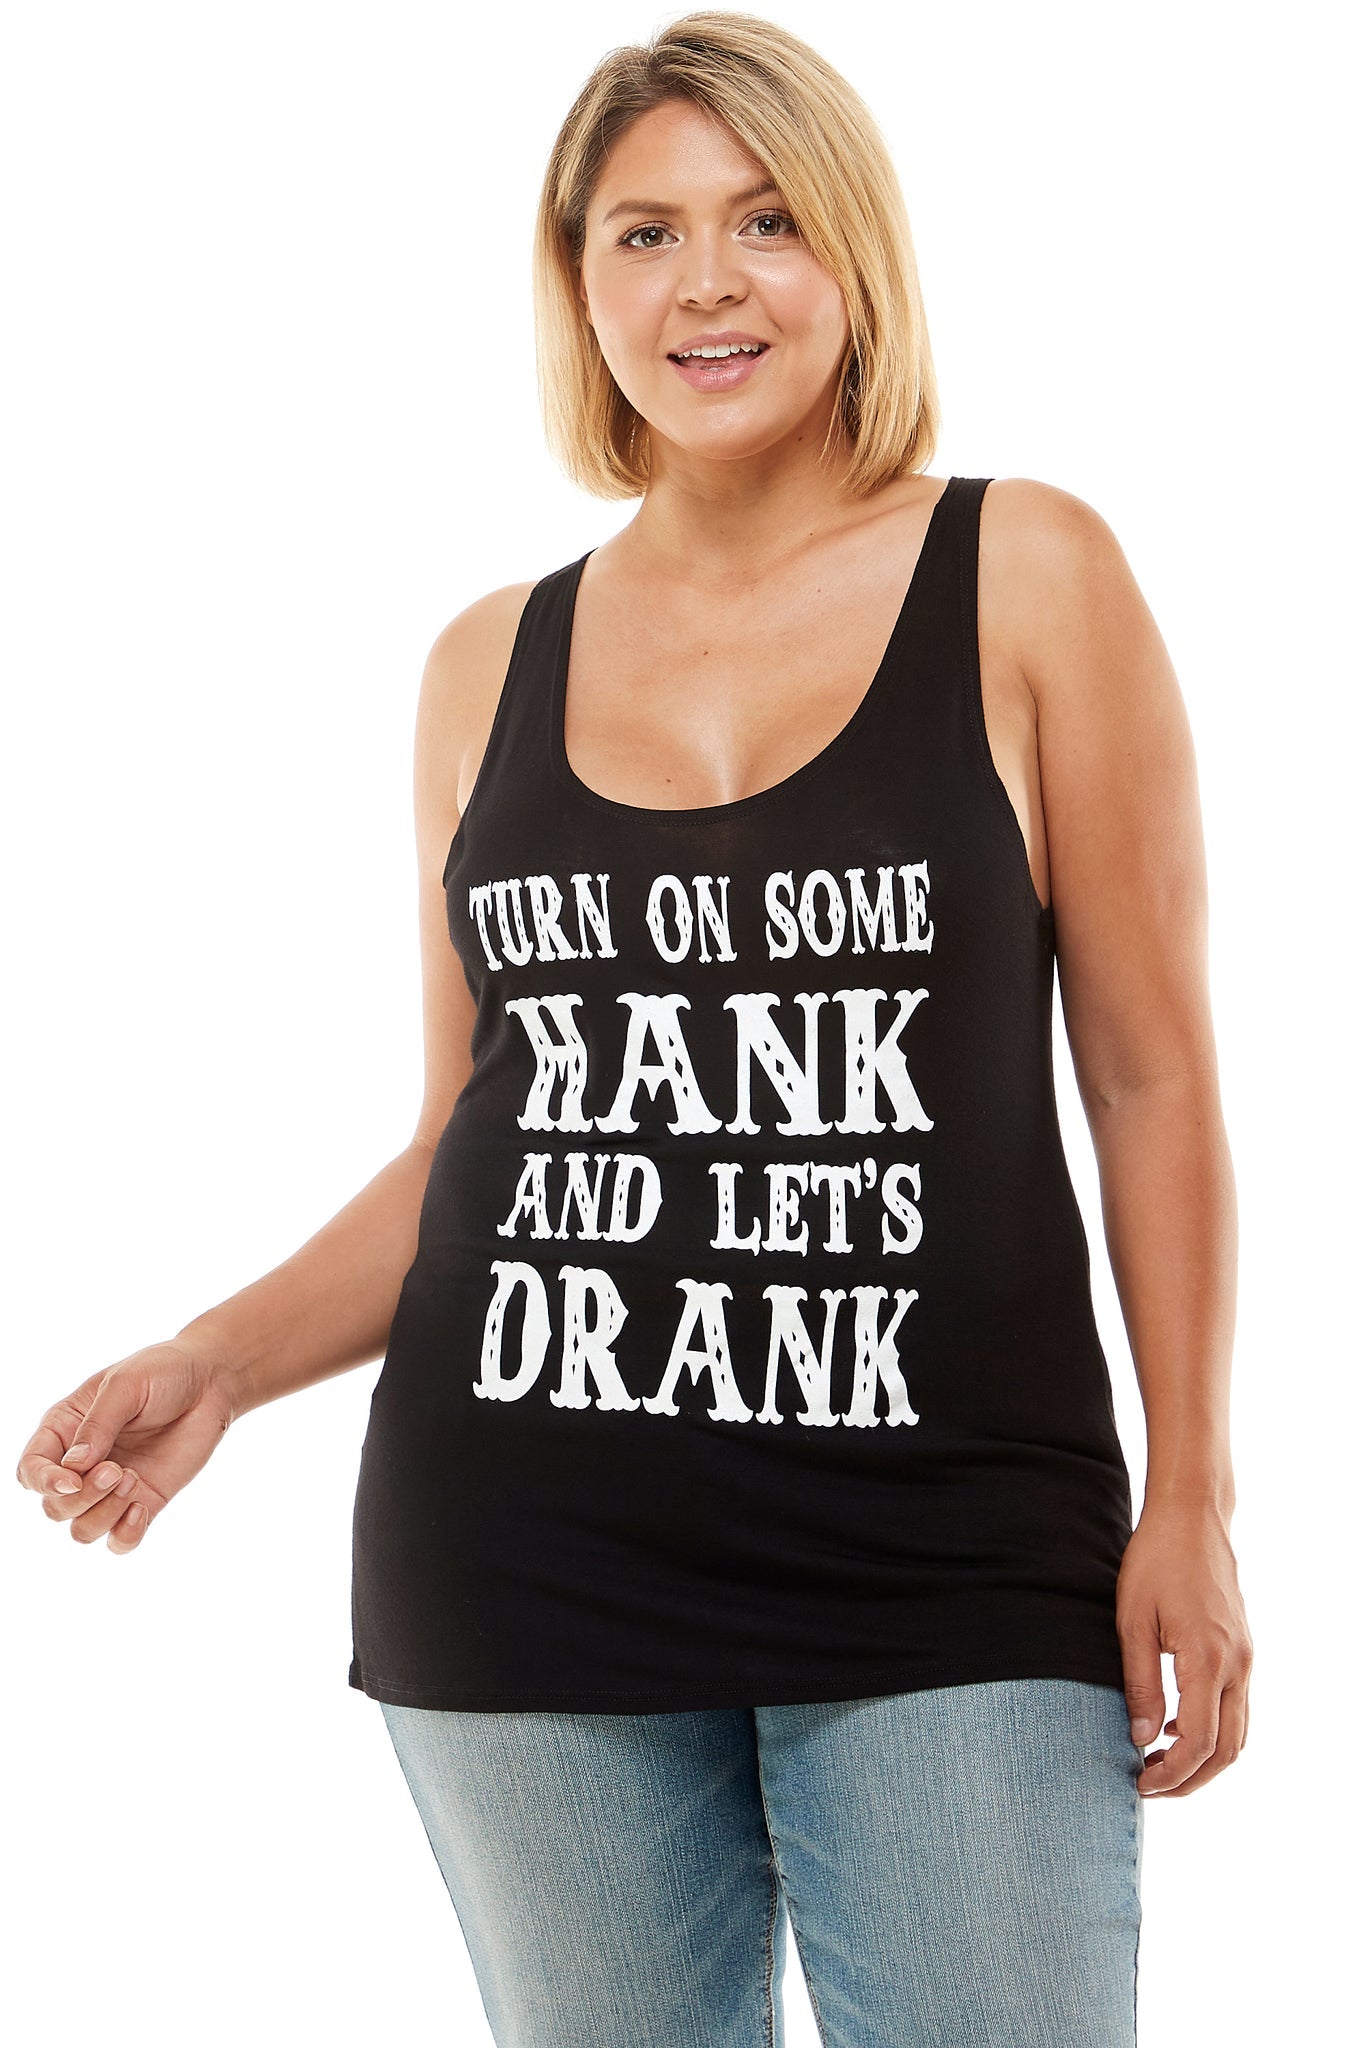 Turn on Some Hank Tank - and, ATTITUDE, COUNTRY, countrystrong, COWGIRL, drinking, flag, GIRL, HOWDY, lips, love, moonshine, music, patriotic, peace, PLUS, rock, rocker, RODEO, roll, shine, SIZE, strong, SUMMER, TANK, TOP, WESTERN - Clothing - Baha Ranch Western Wear